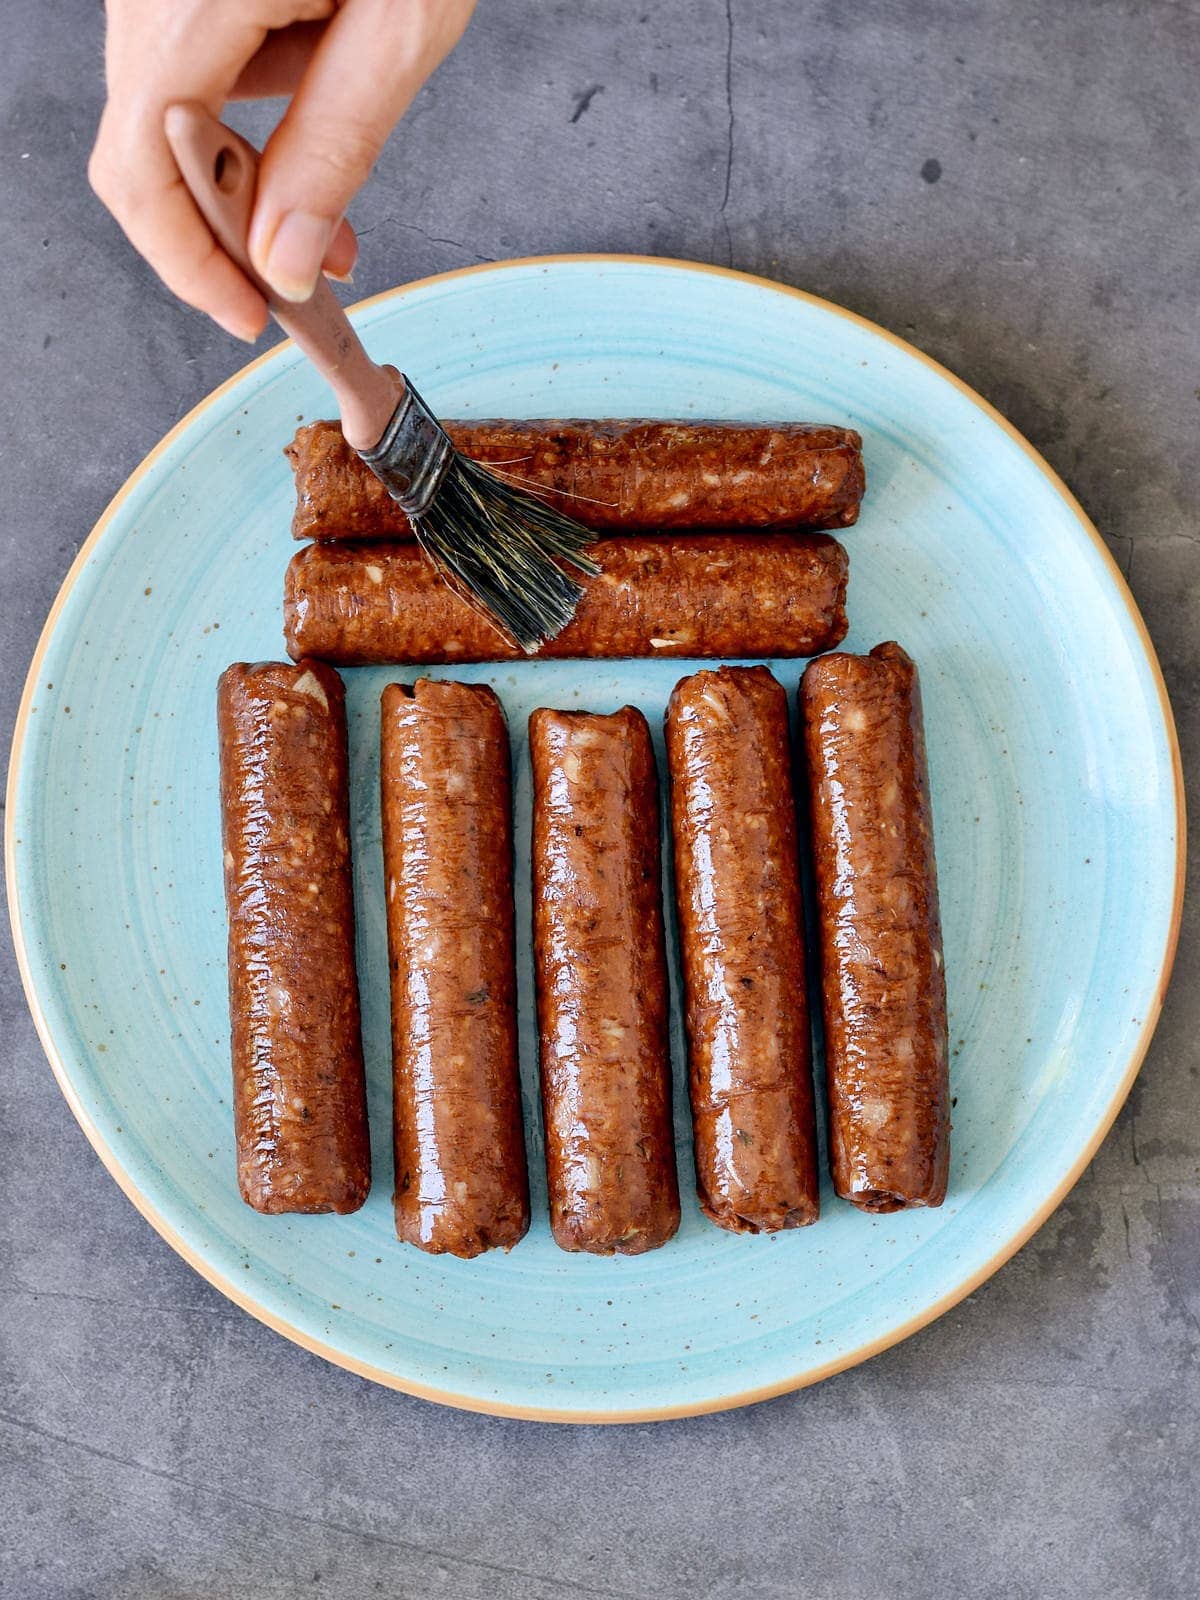 How to Grill Vegan Sausages That Don't Fall Apart